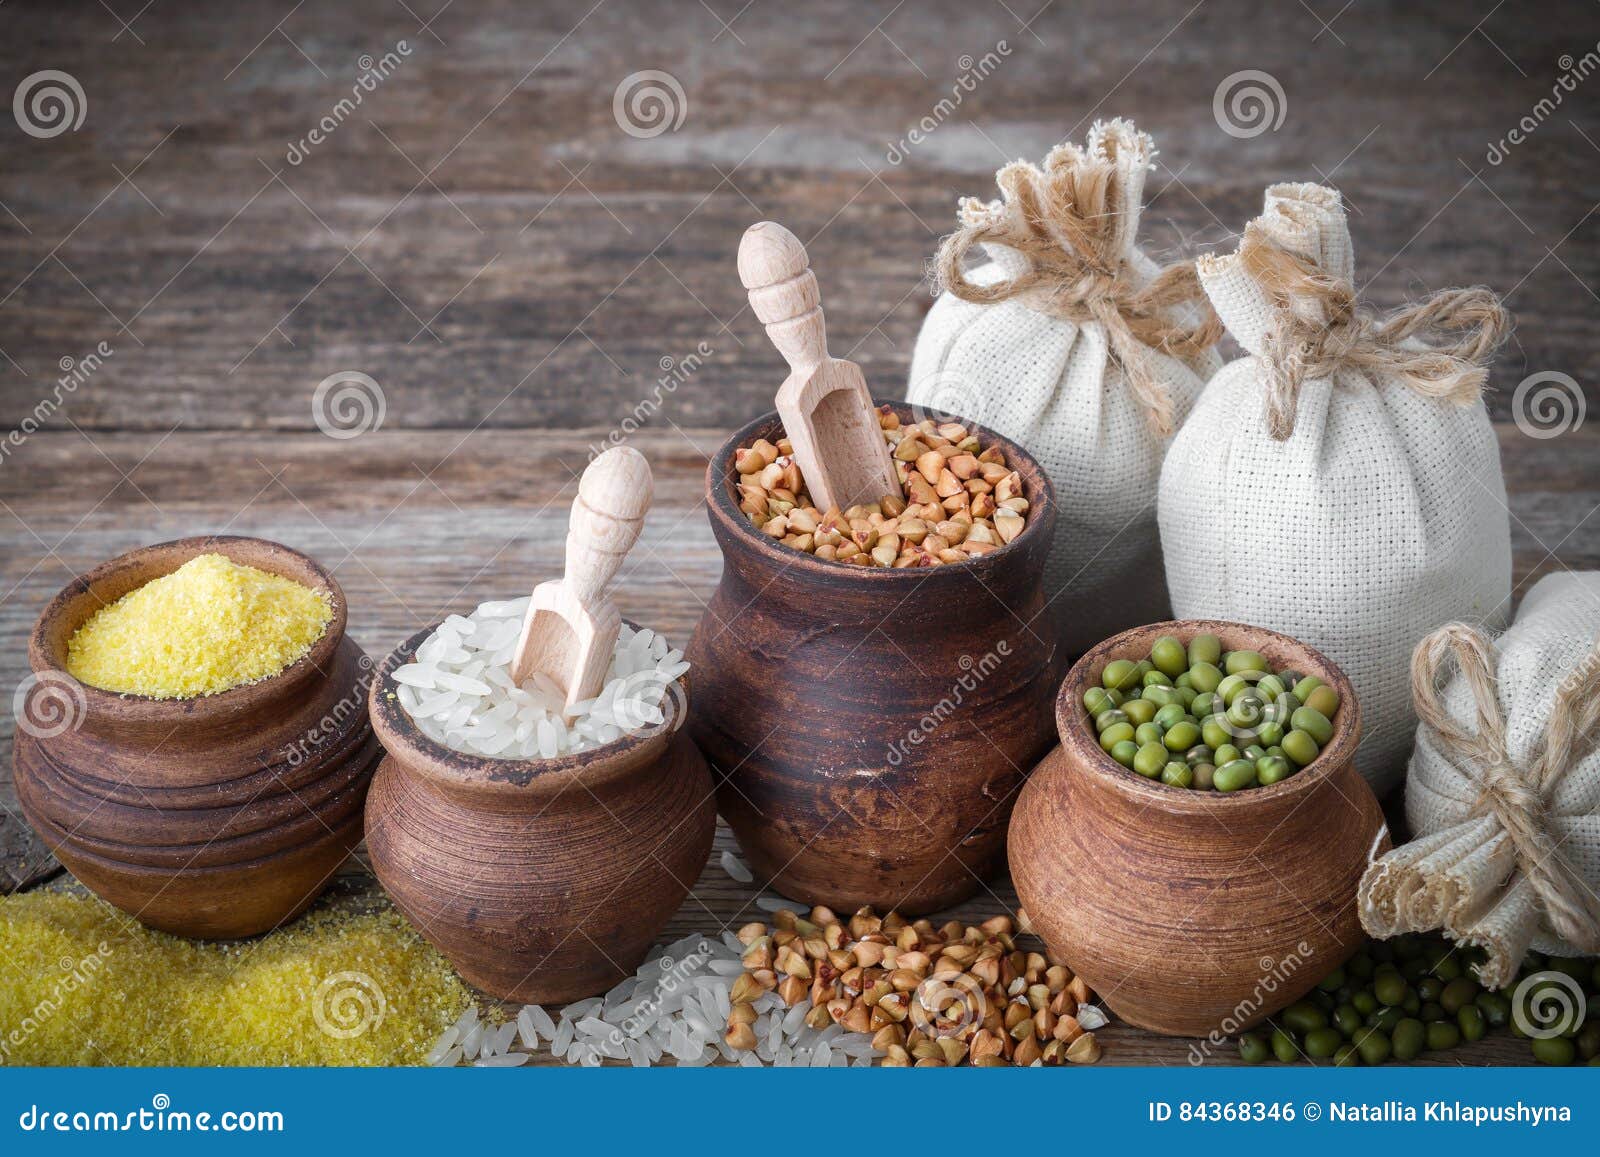 Rustic Clay Pots Filled with Grains and Hessian Bags. Stock Photo ...